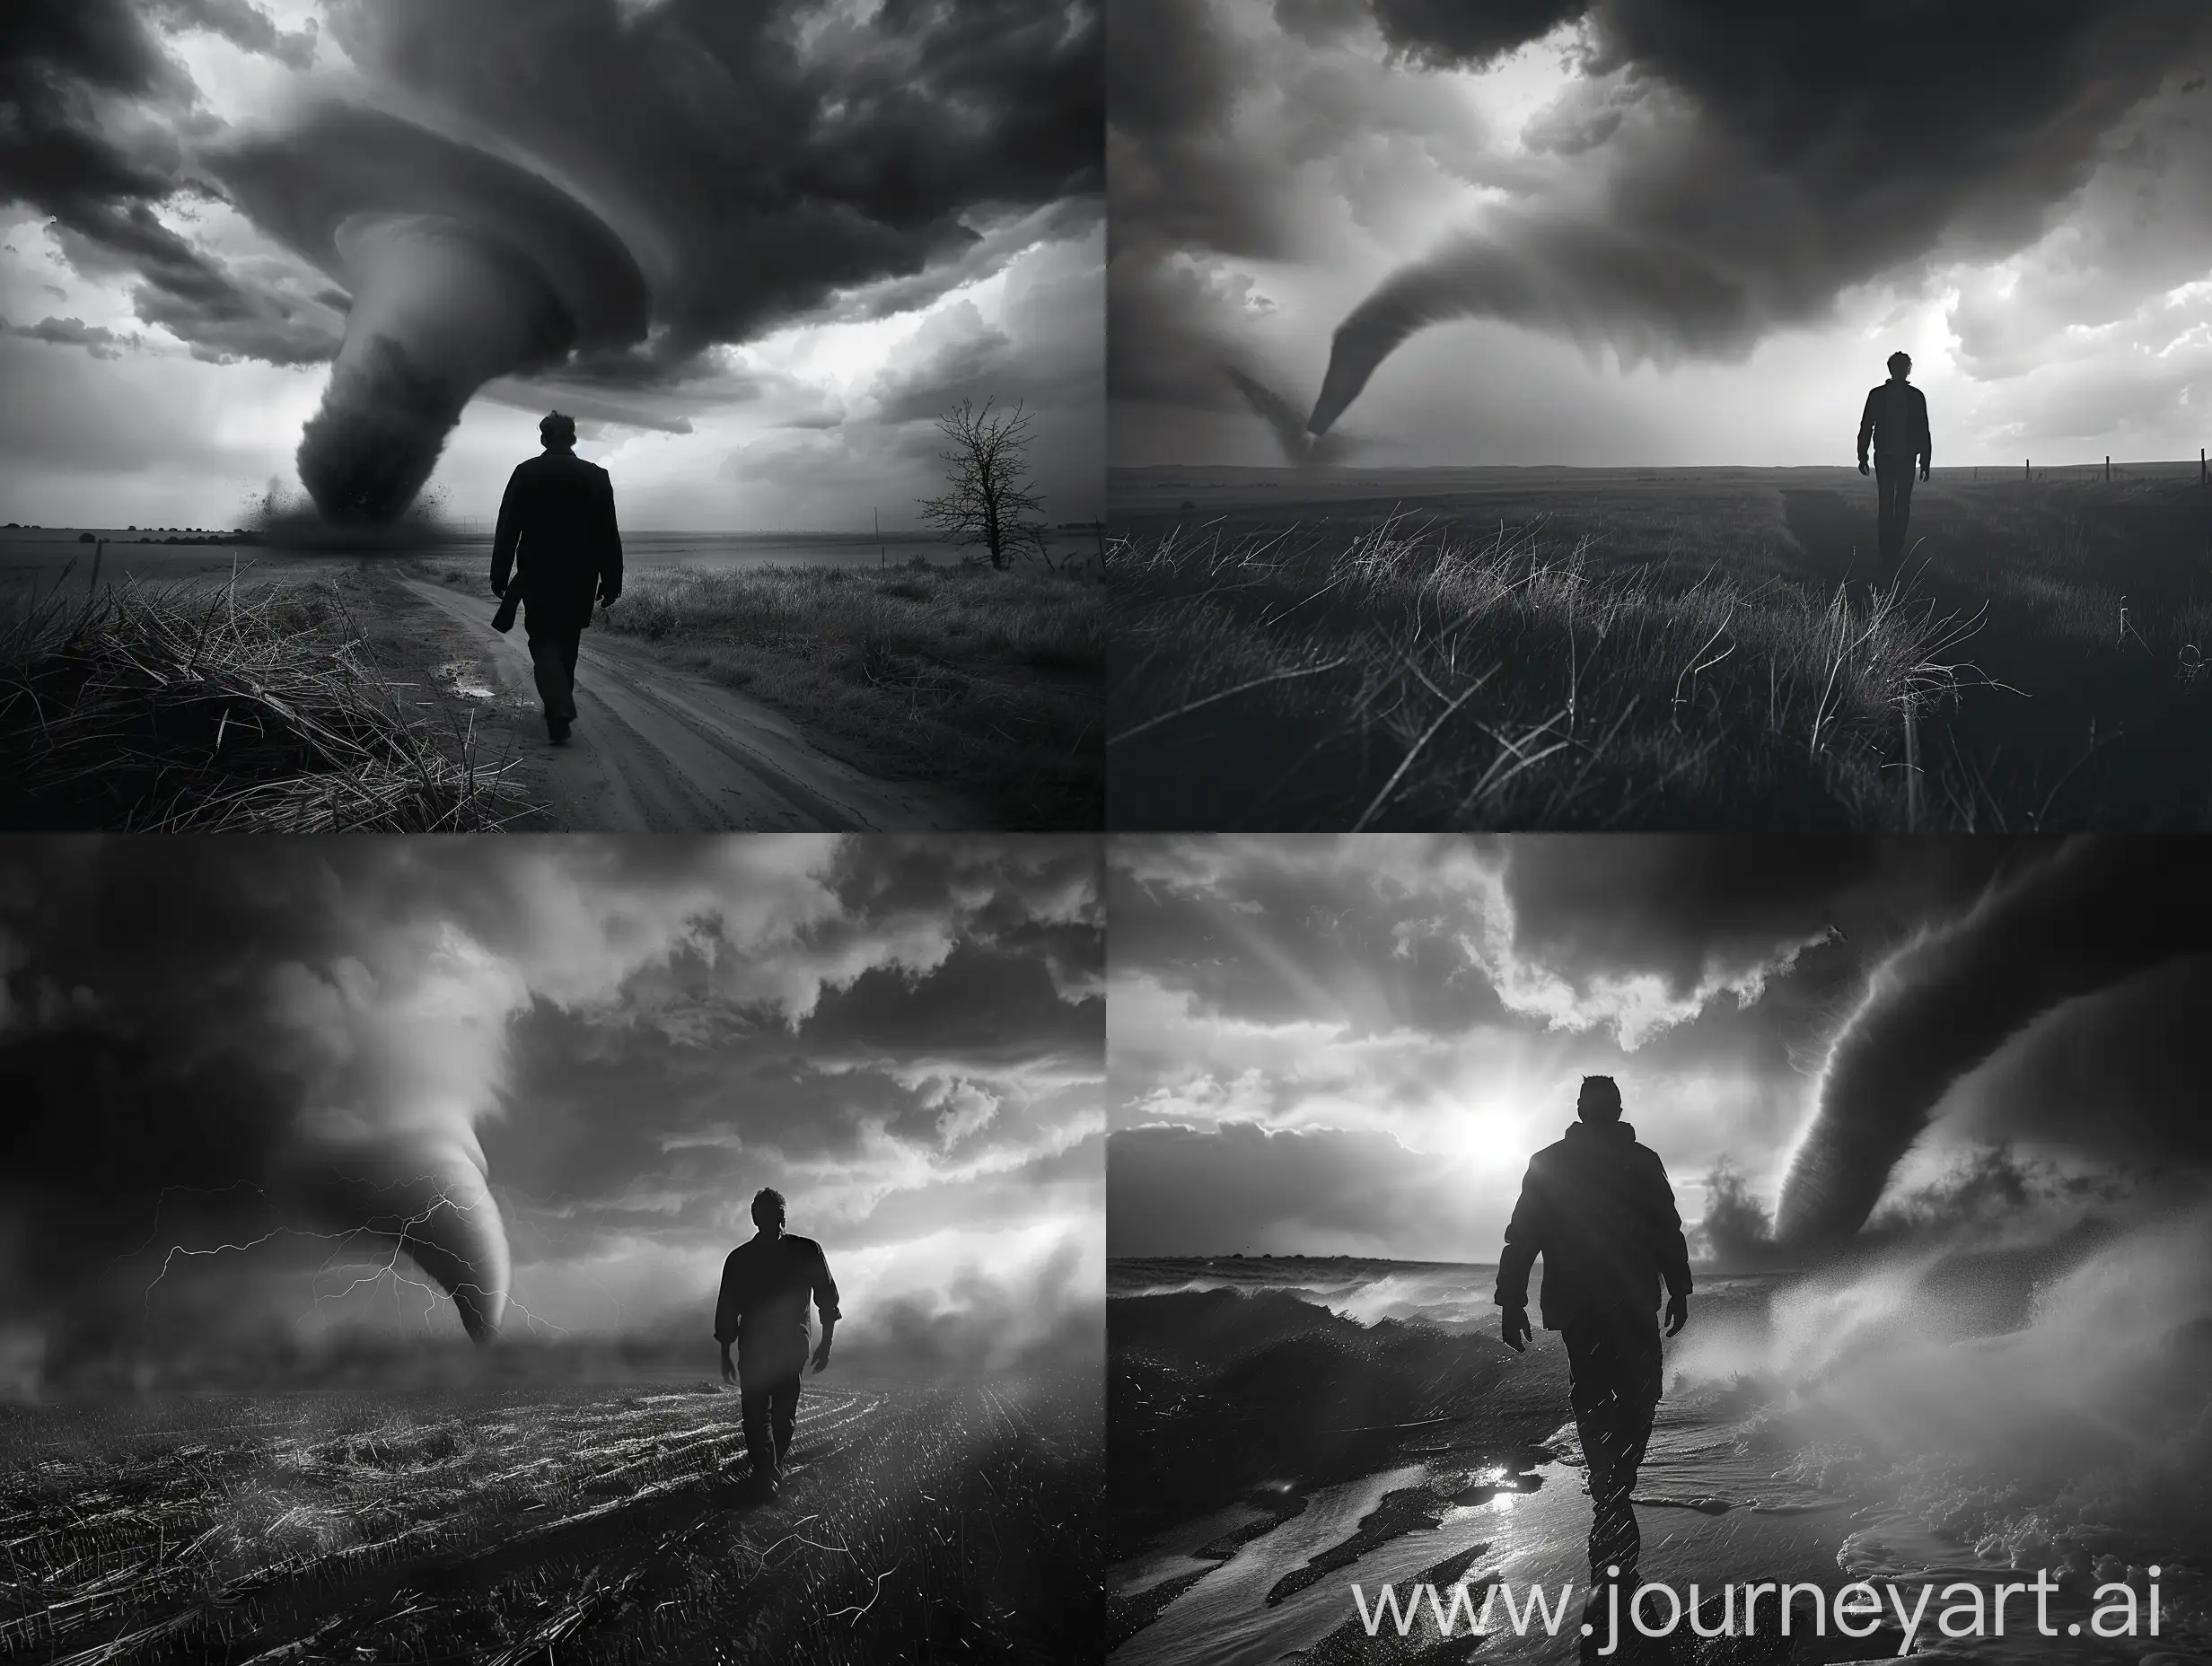 man walking calmly towards the camera from distance. a tornado can be seen far behind him. black and white, dramatic lighting.